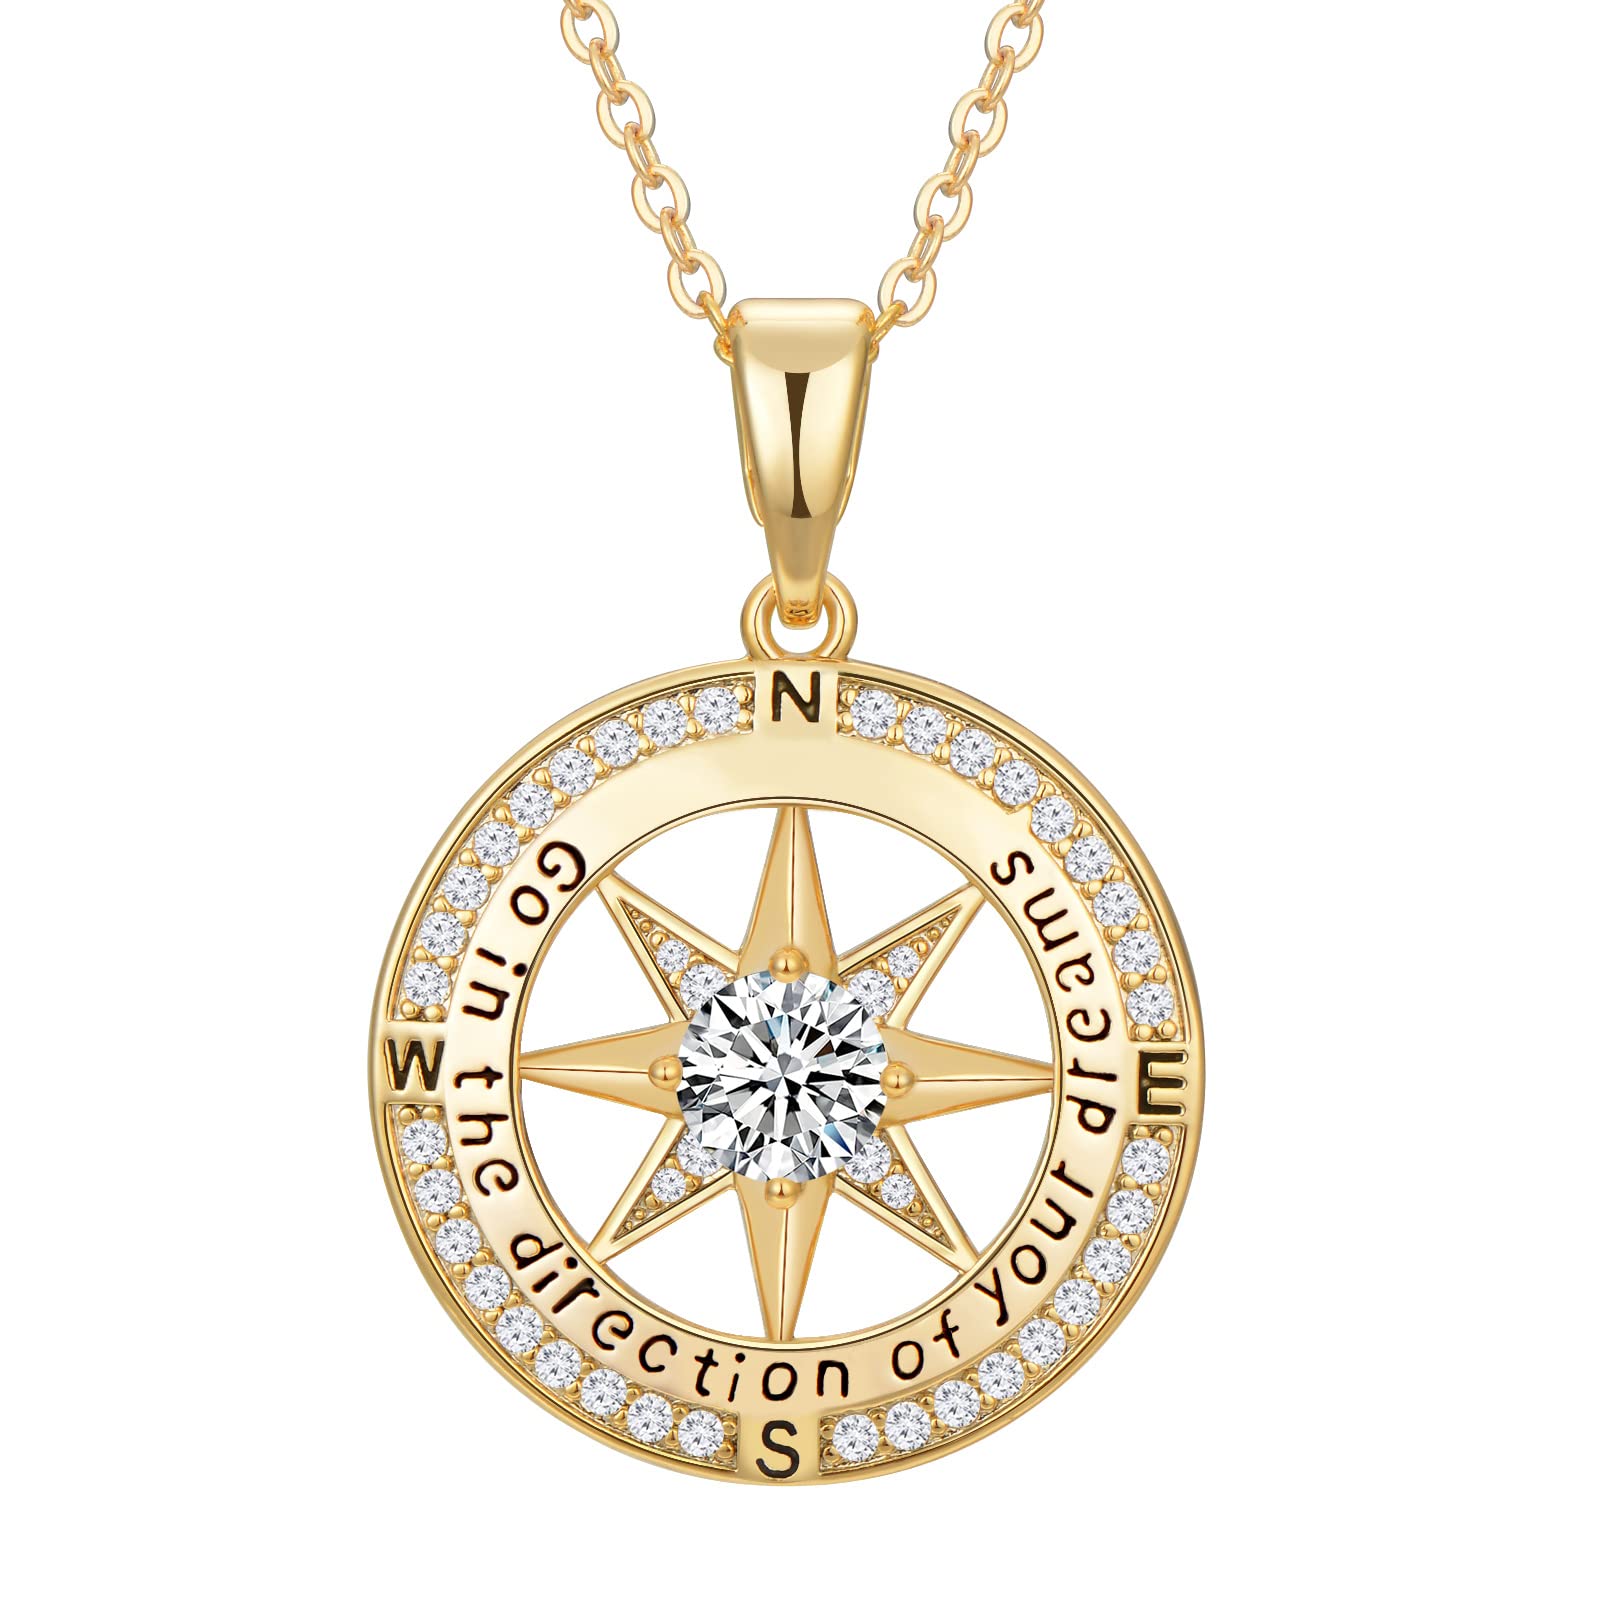 Graduation Gifts for Her 2023, Inspirational Graduates Compass Necklace for Women Girls Jewelry, Class of 2023 Senior High School College Graduation Gifts for Friends with Congrats Grad Box and Gift Card (18K Gold Filled 925 Sterling Silver necklace)